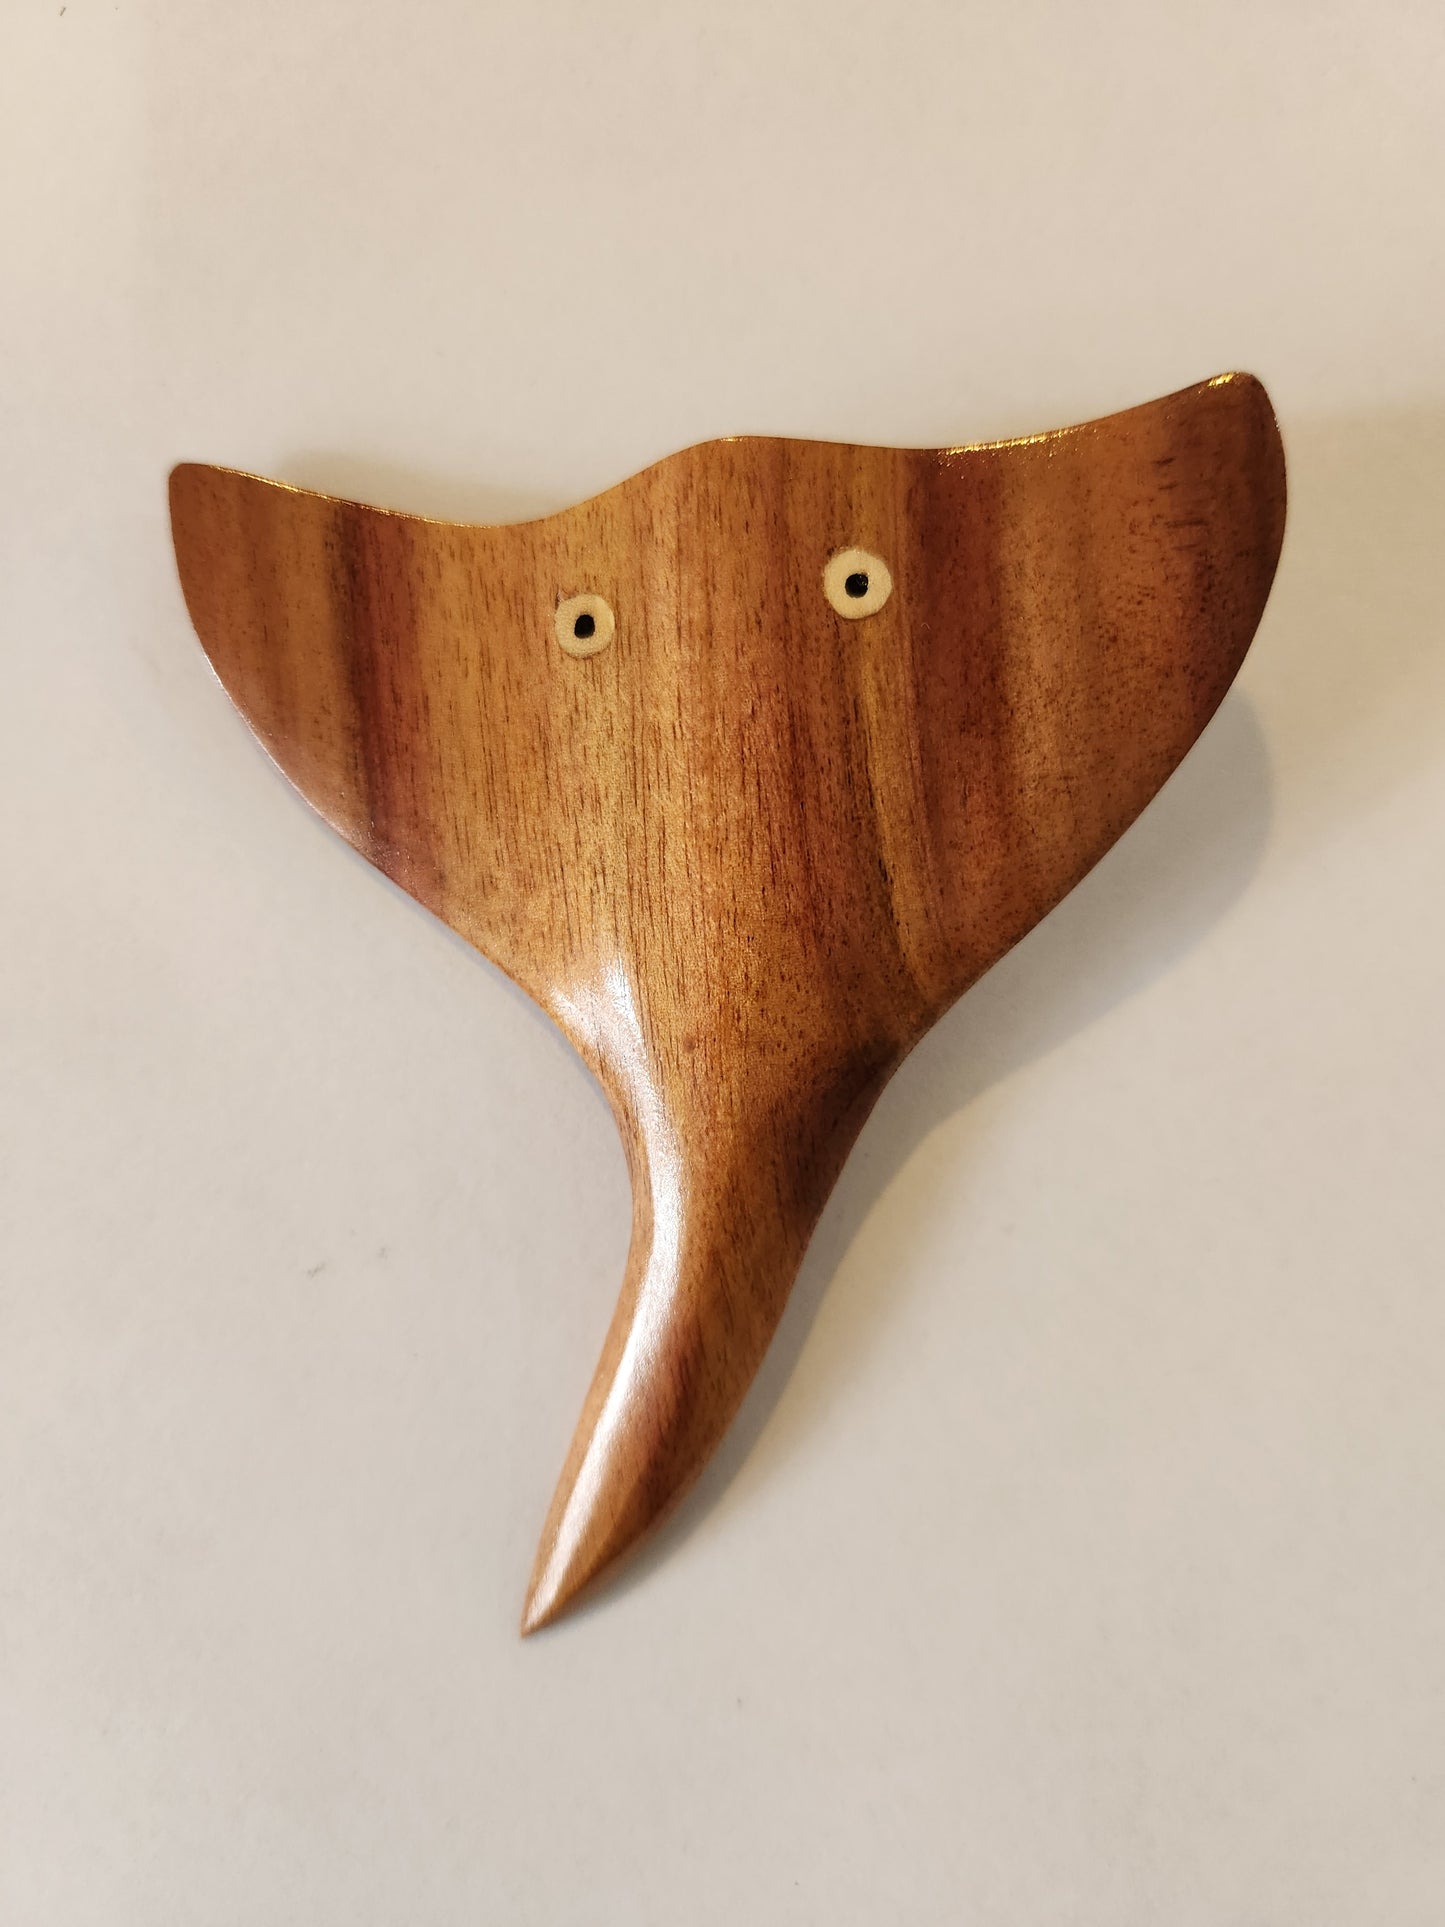 Hand carved Little Stingray from local Miro or Hibiscus wood